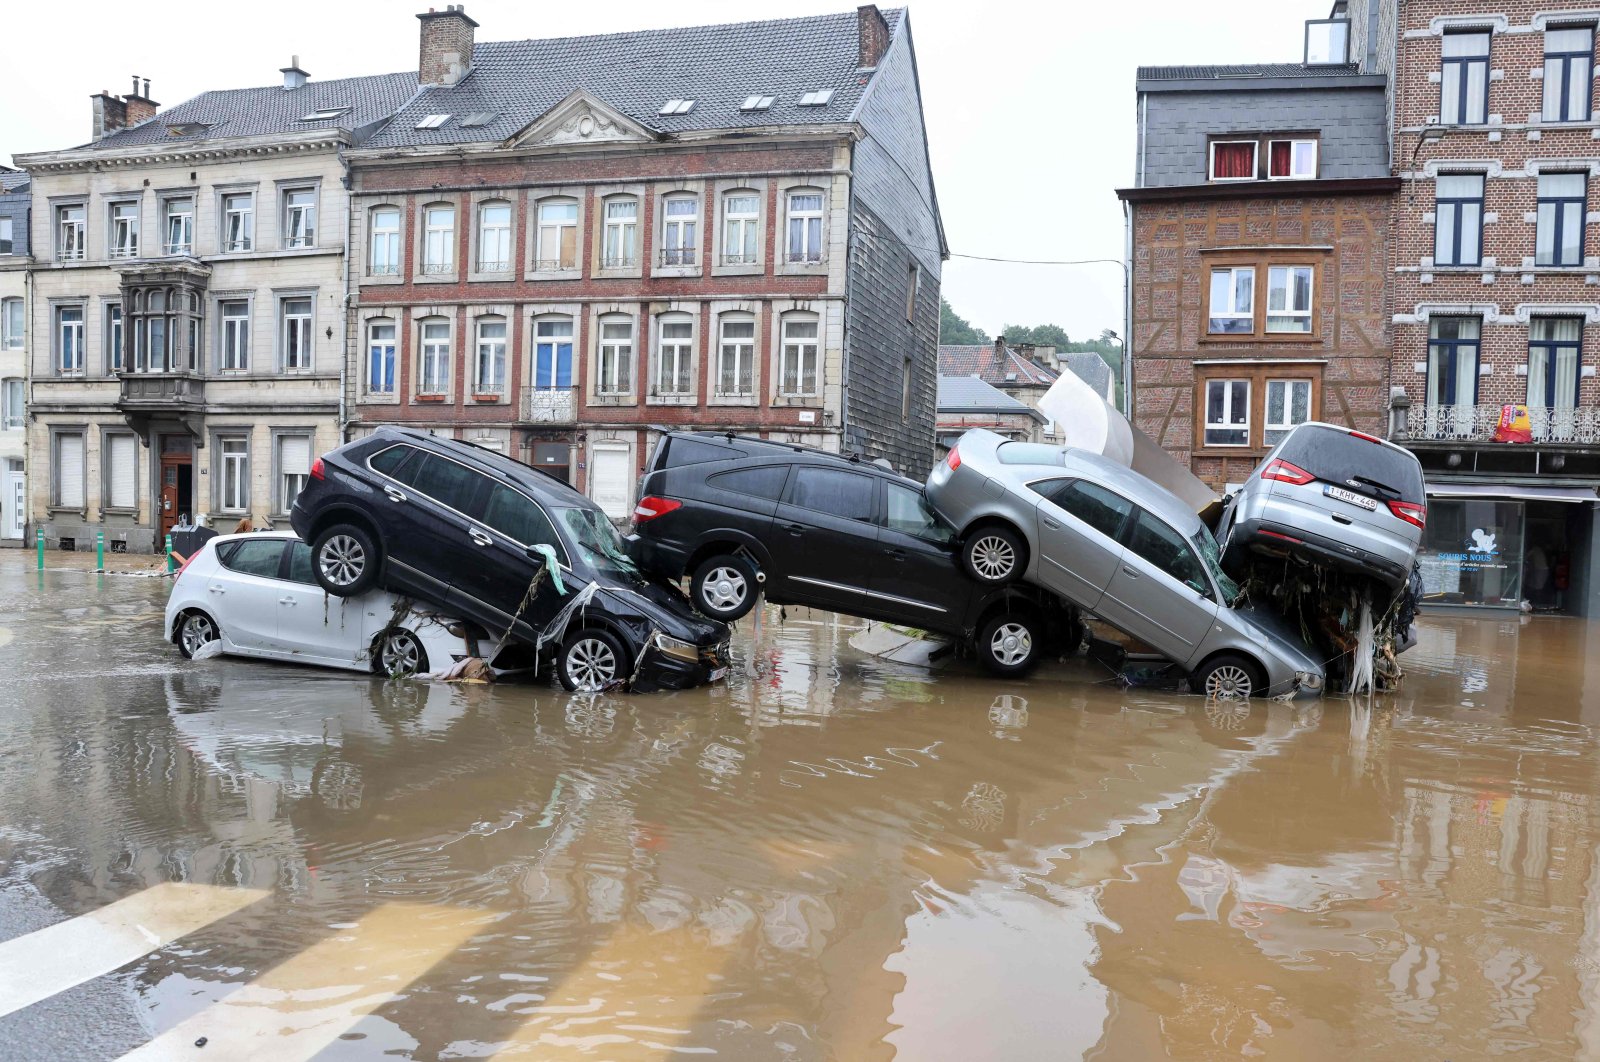 Cars piled up by the water at a roundabout in the Belgian city of Verviers after heavy rains and floods lashed Belgium, July 15, 2021. (AFP Photo)